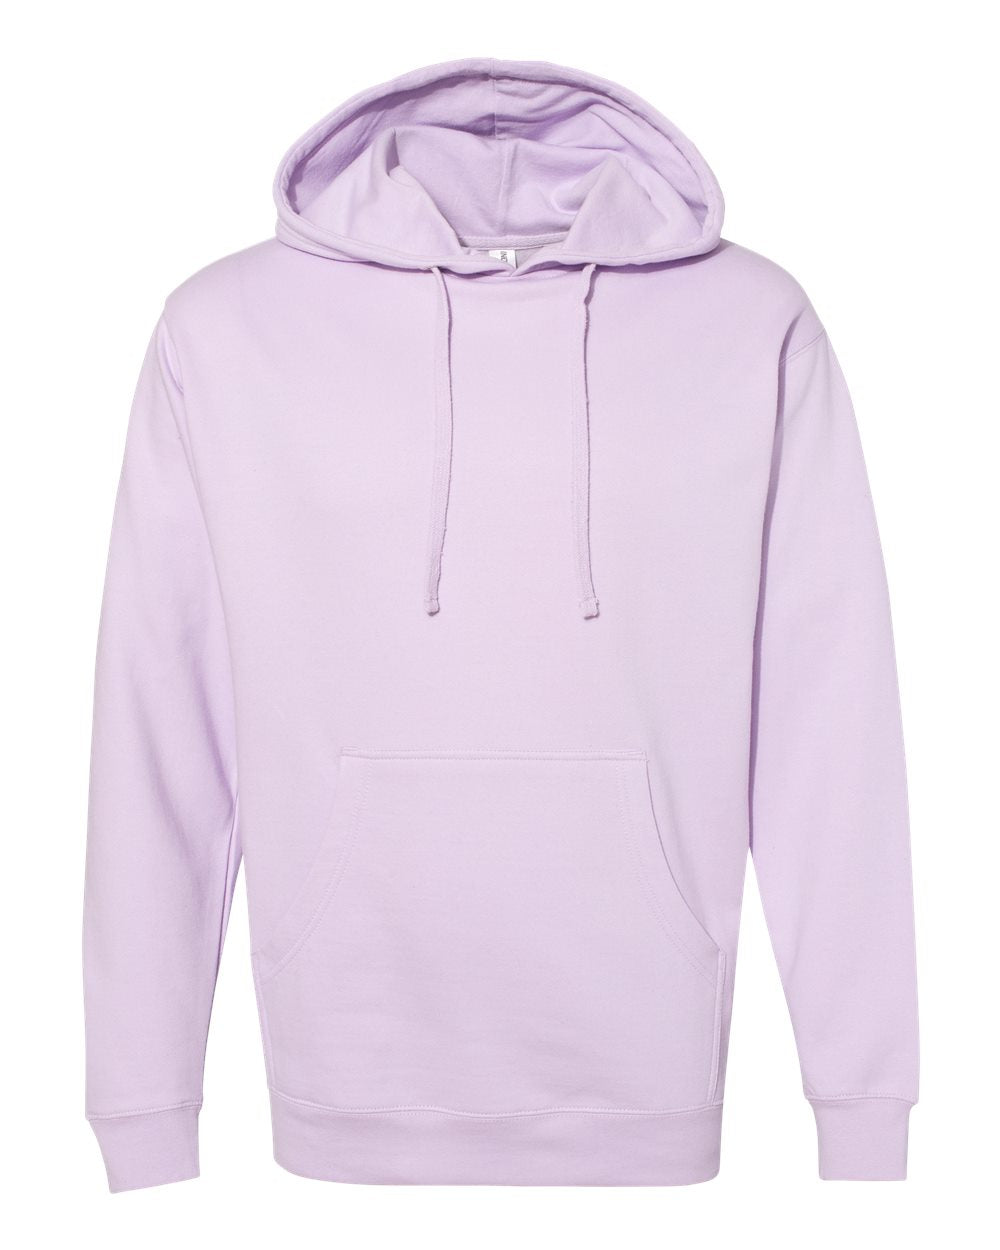 Independent Trading Co. Midweight Hooded Sweatshirt SS4500 #color_Lavender